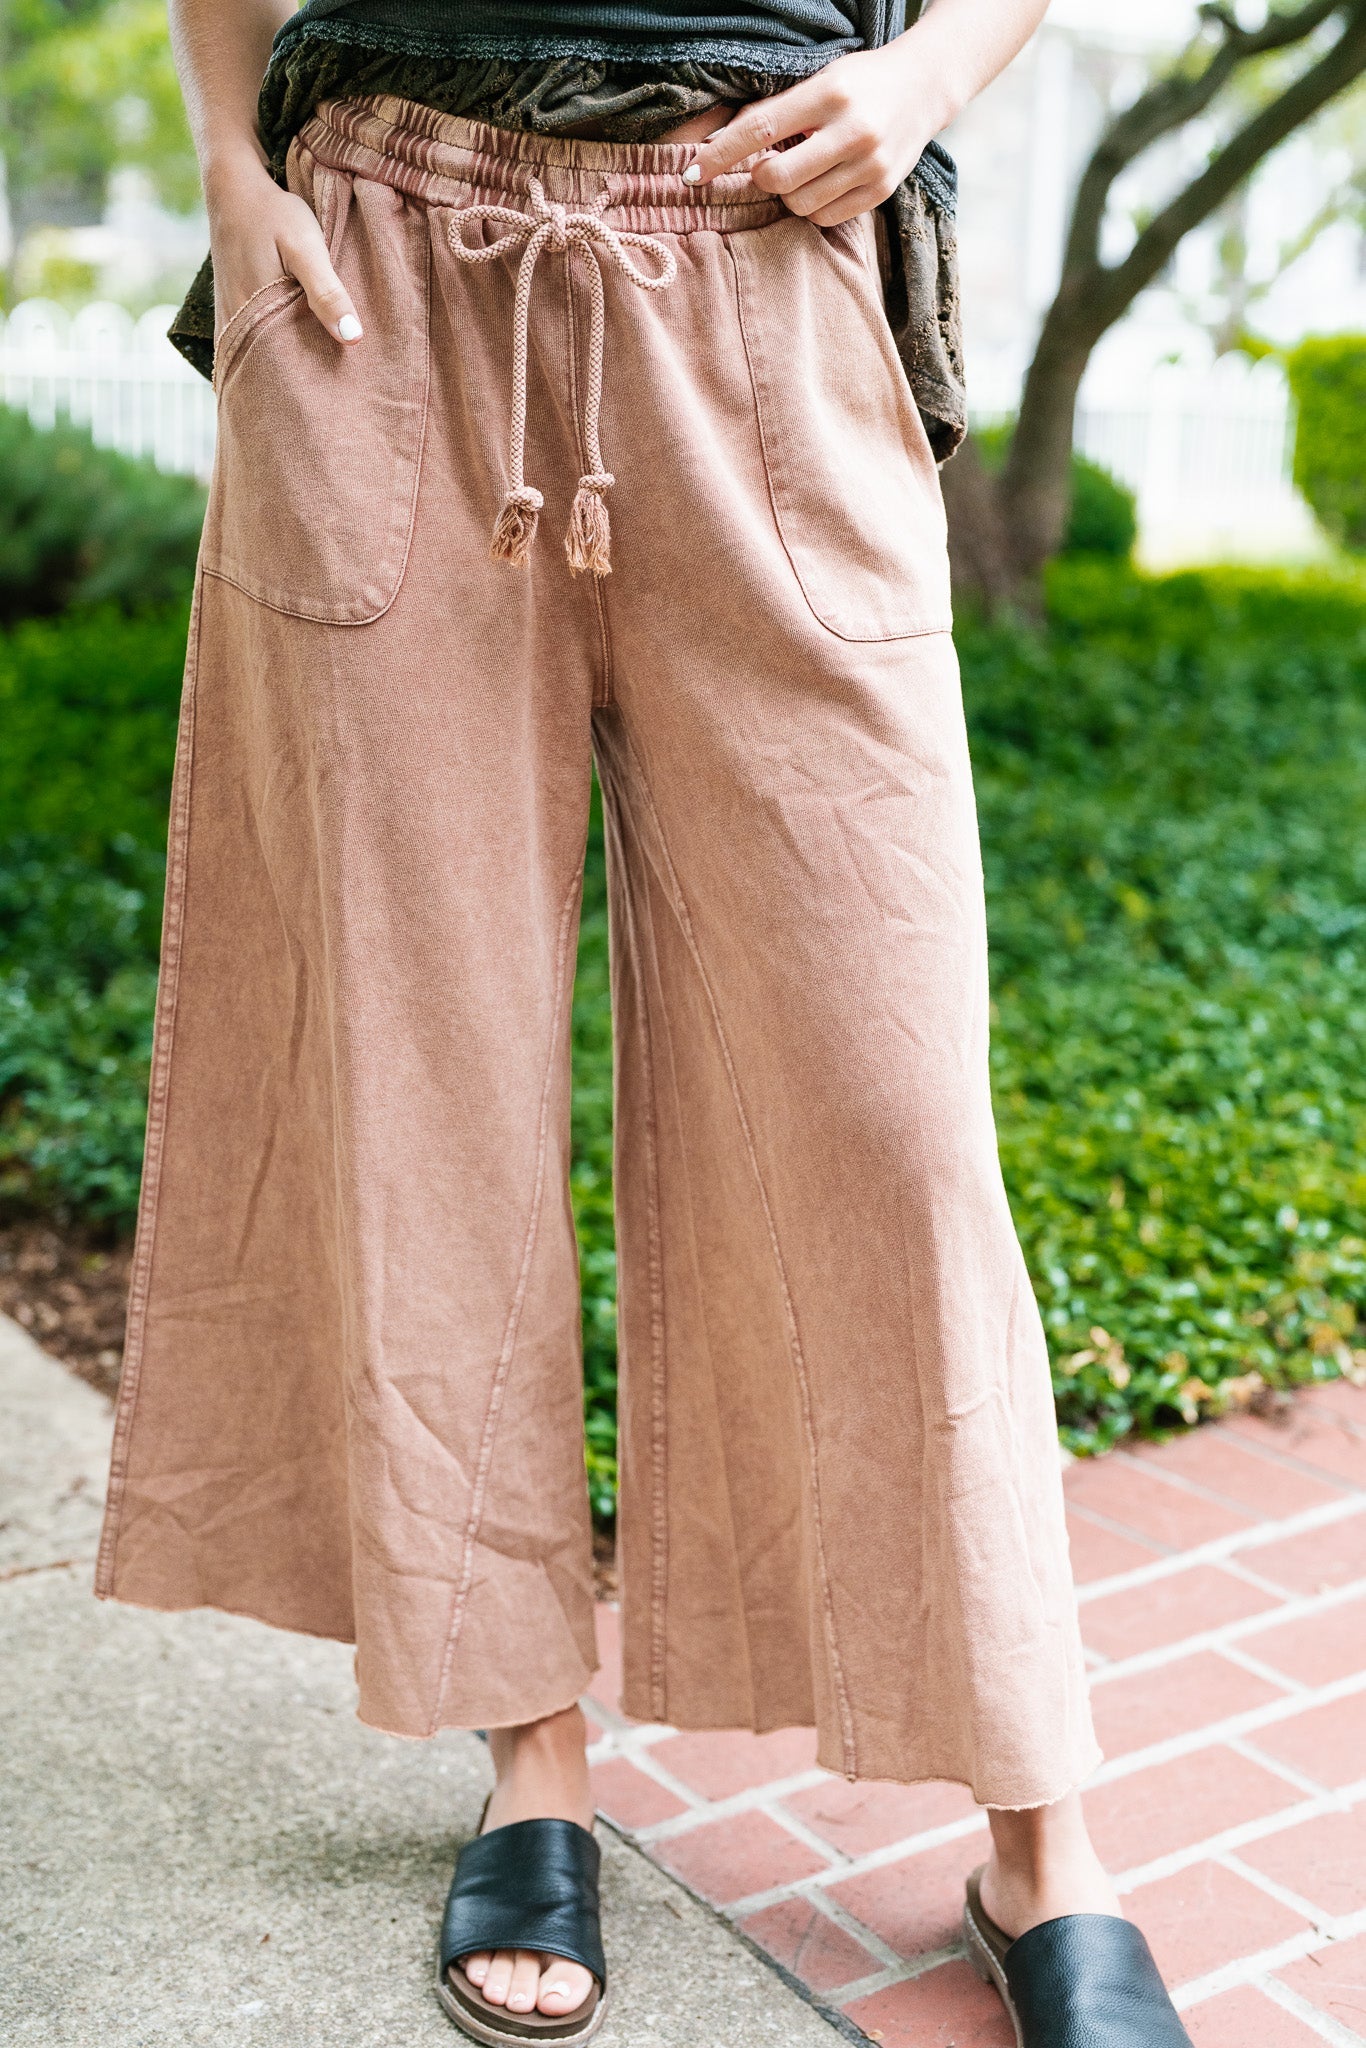 Can't Be Matched Mineral Wash Wide Leg Pants - Red Bean